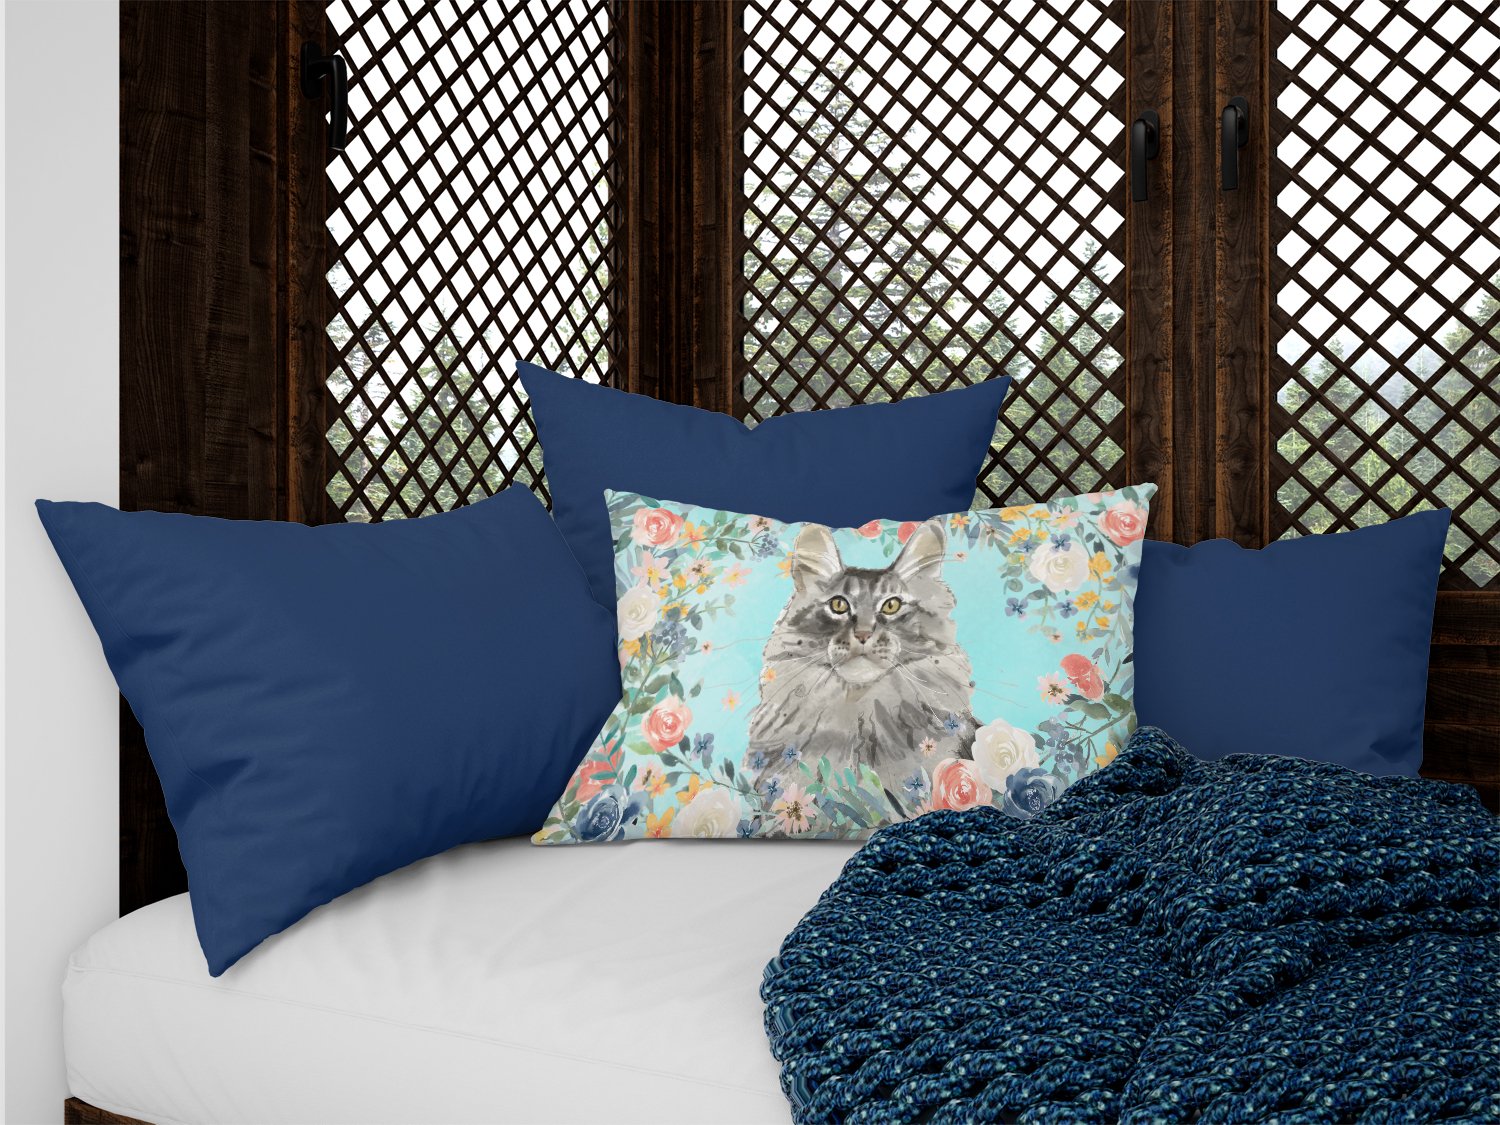 Maine Coon Spring Flowers Canvas Fabric Decorative Pillow CK3393PW1216 by Caroline's Treasures